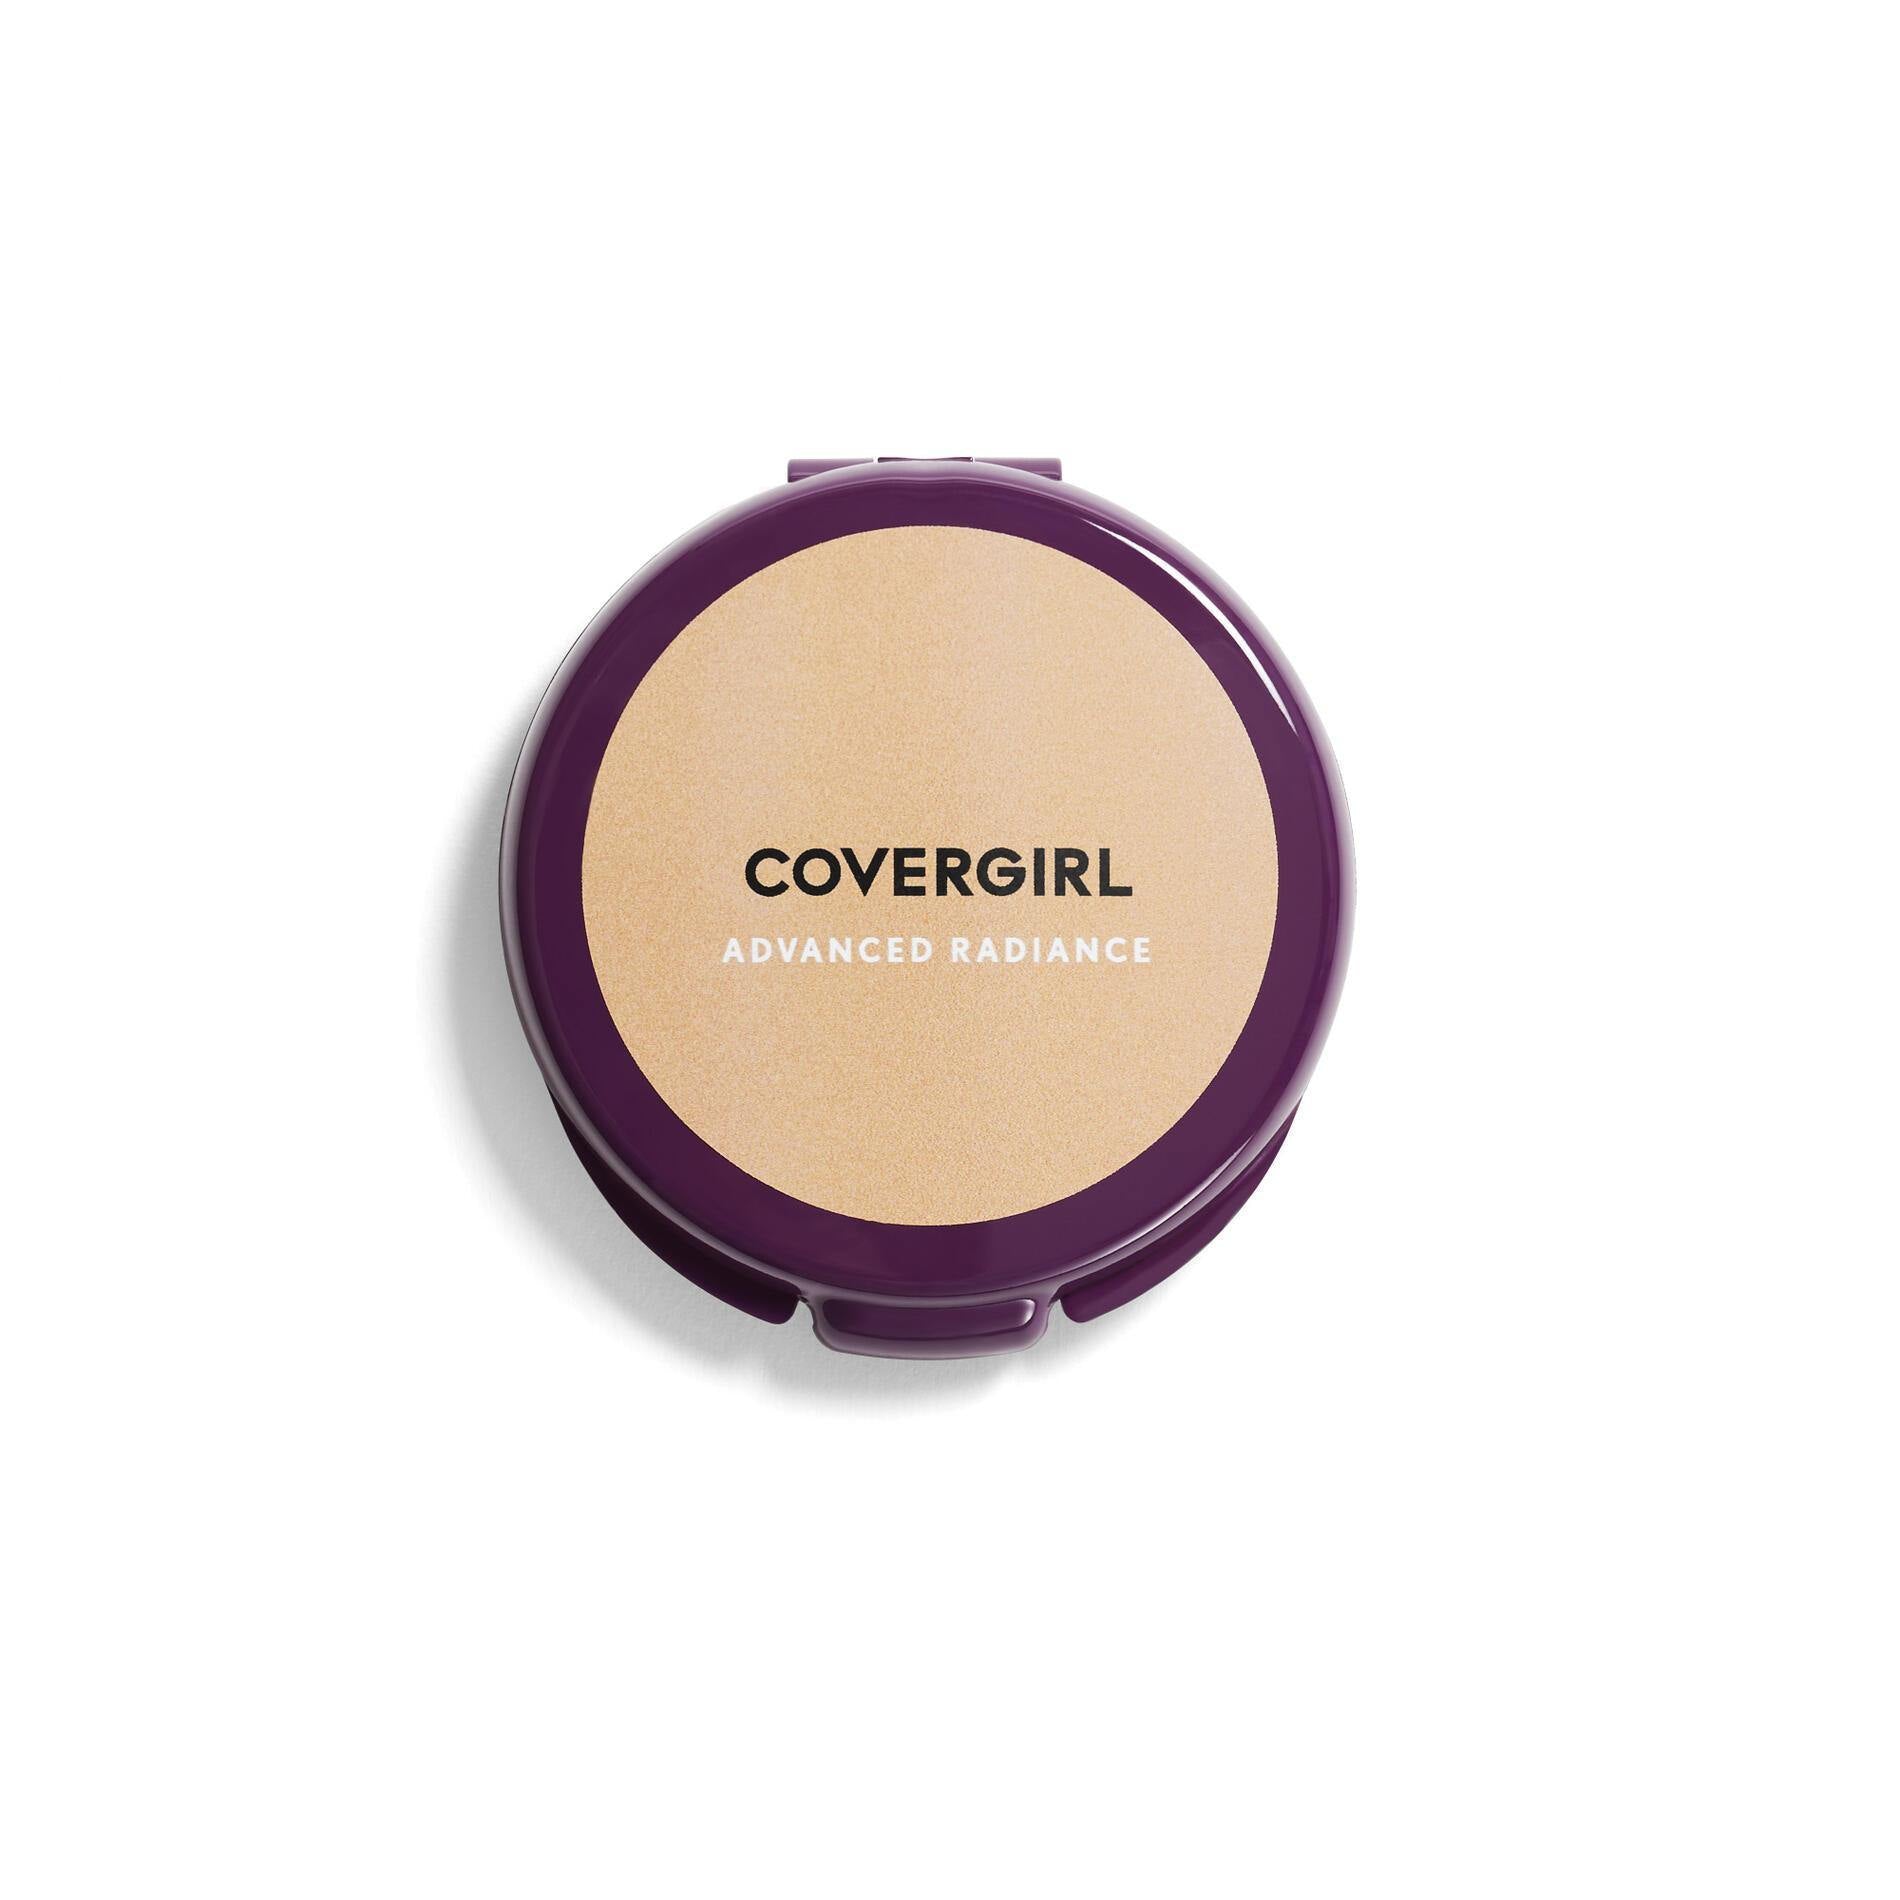 Covergirl Advanced Radiance Age Defying Pressed Powder 125 soft honey Miel Tendre (CARDED) - www.indiancart.com.au - Foundation - Covergirl - Covergirl